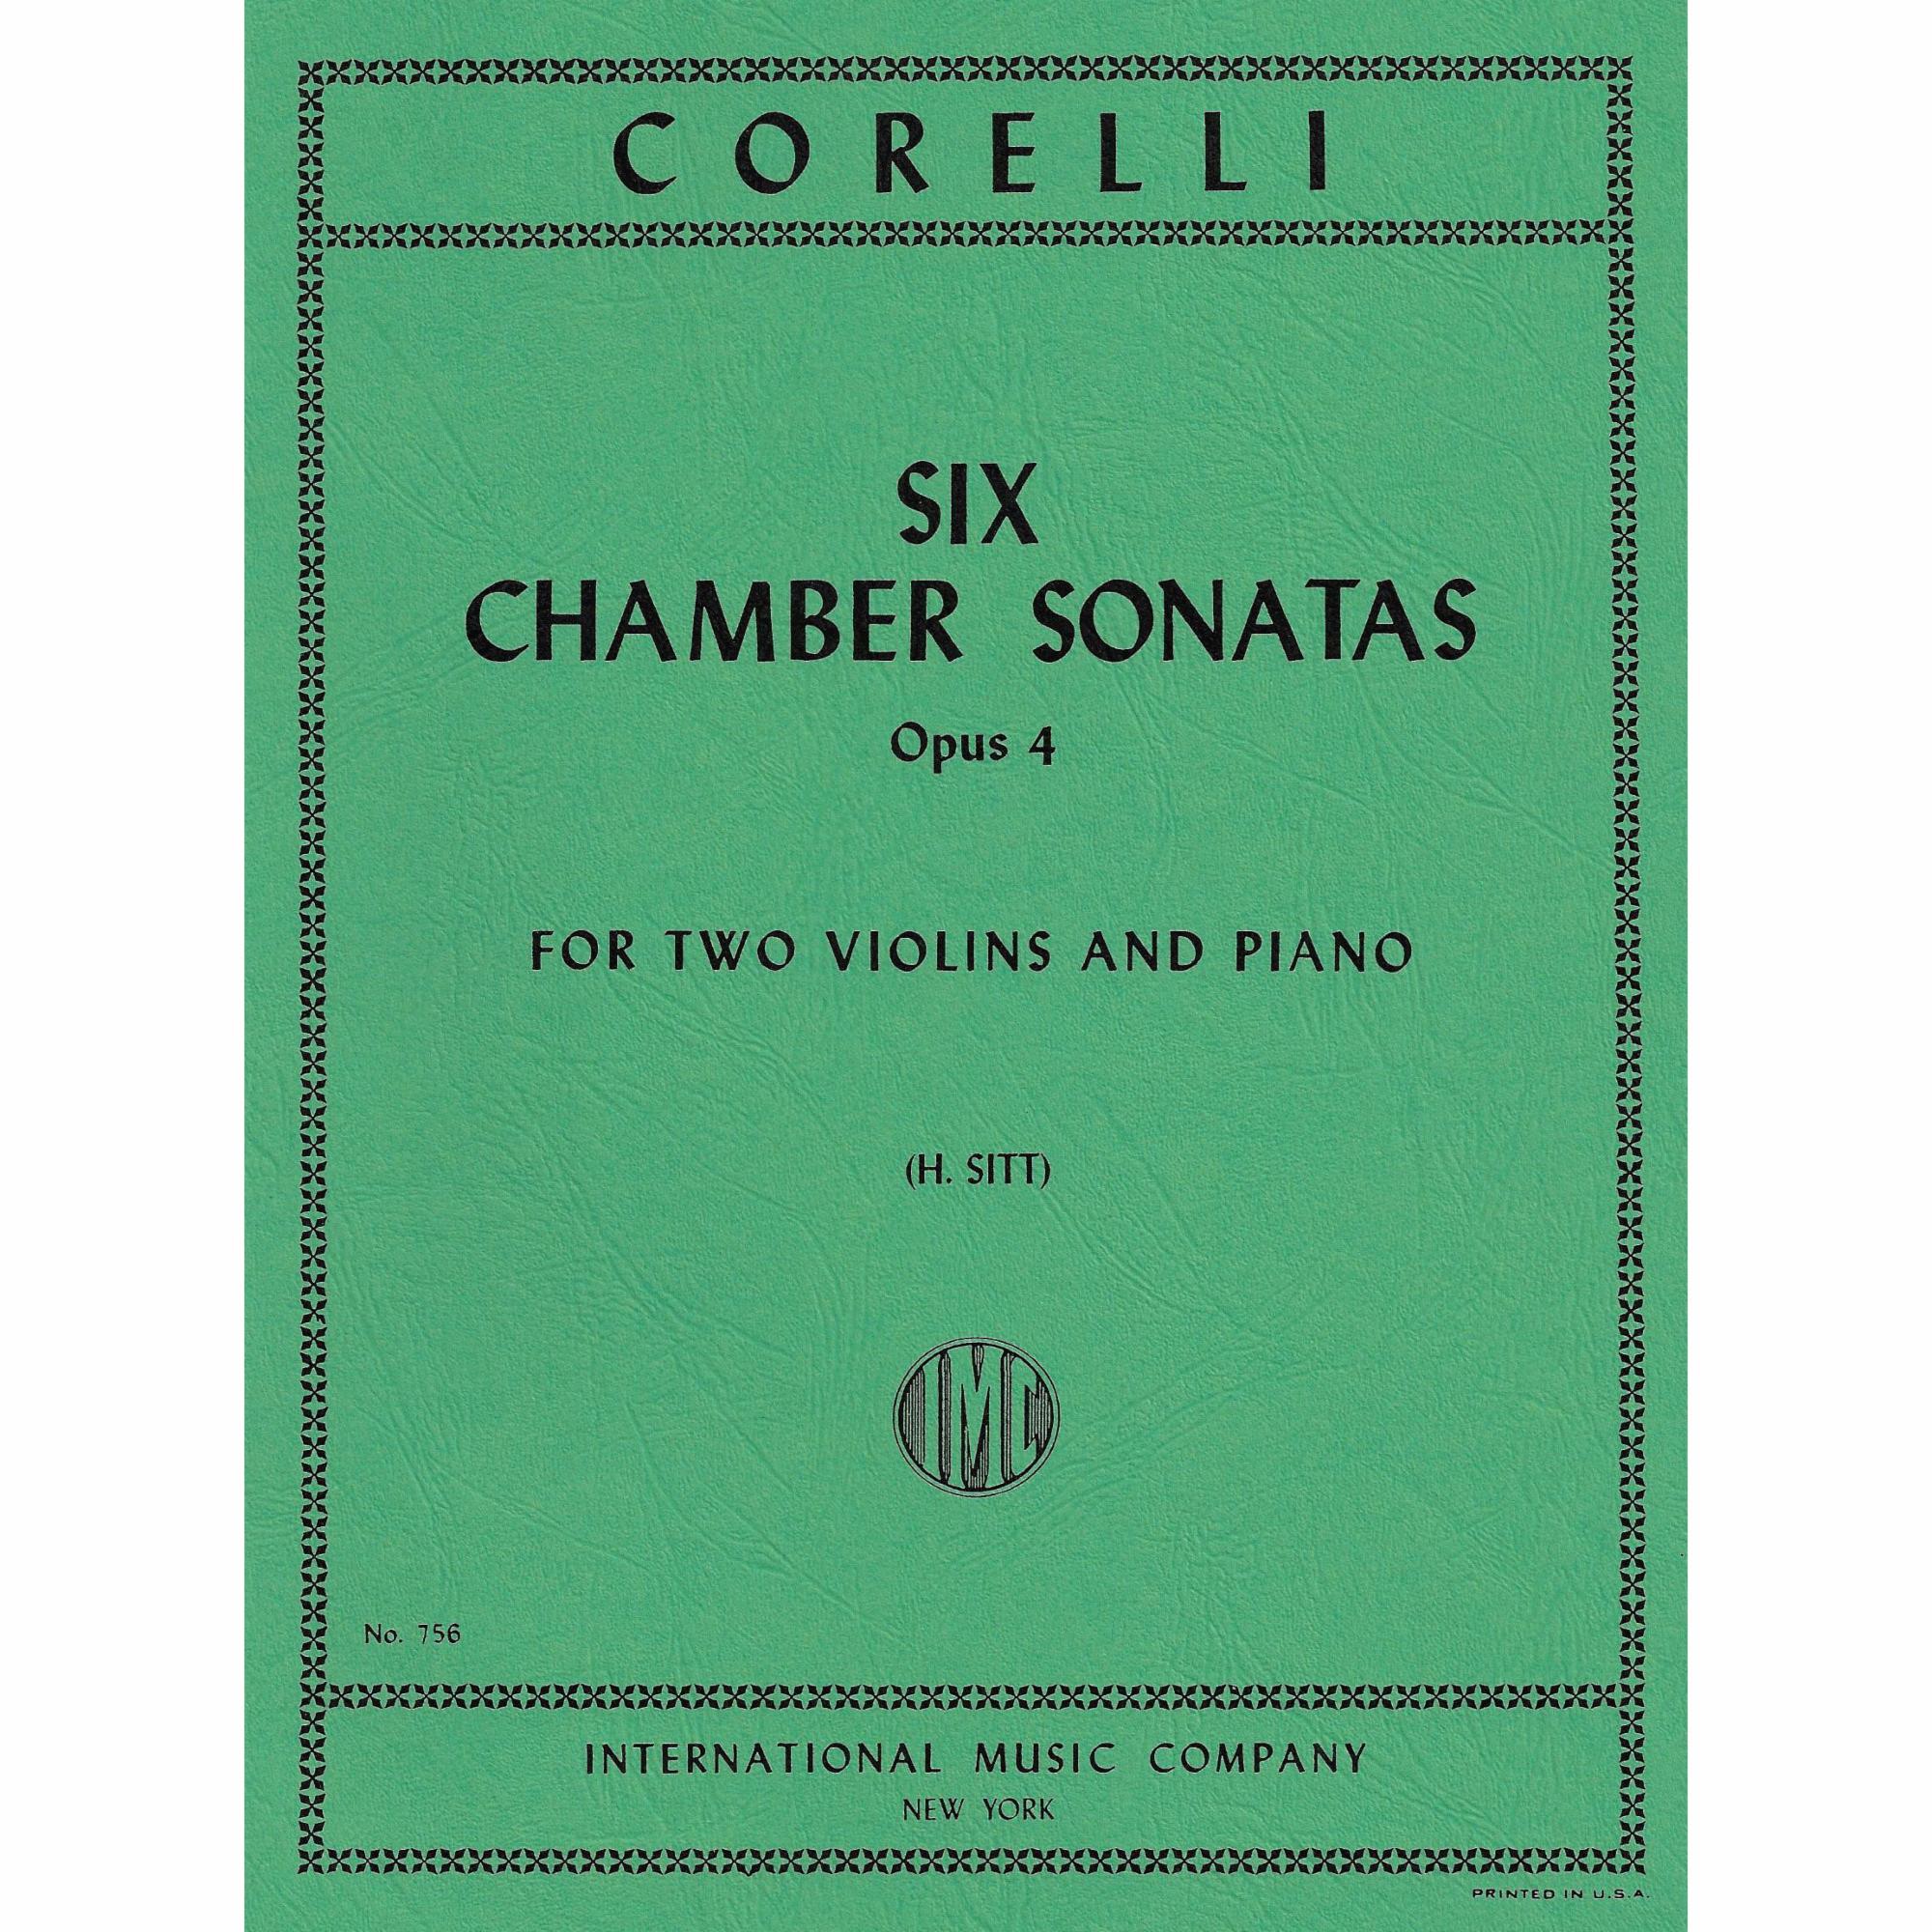 Corelli -- Six Chamber Sonatas, Op. 4 for Two Violins and Piano